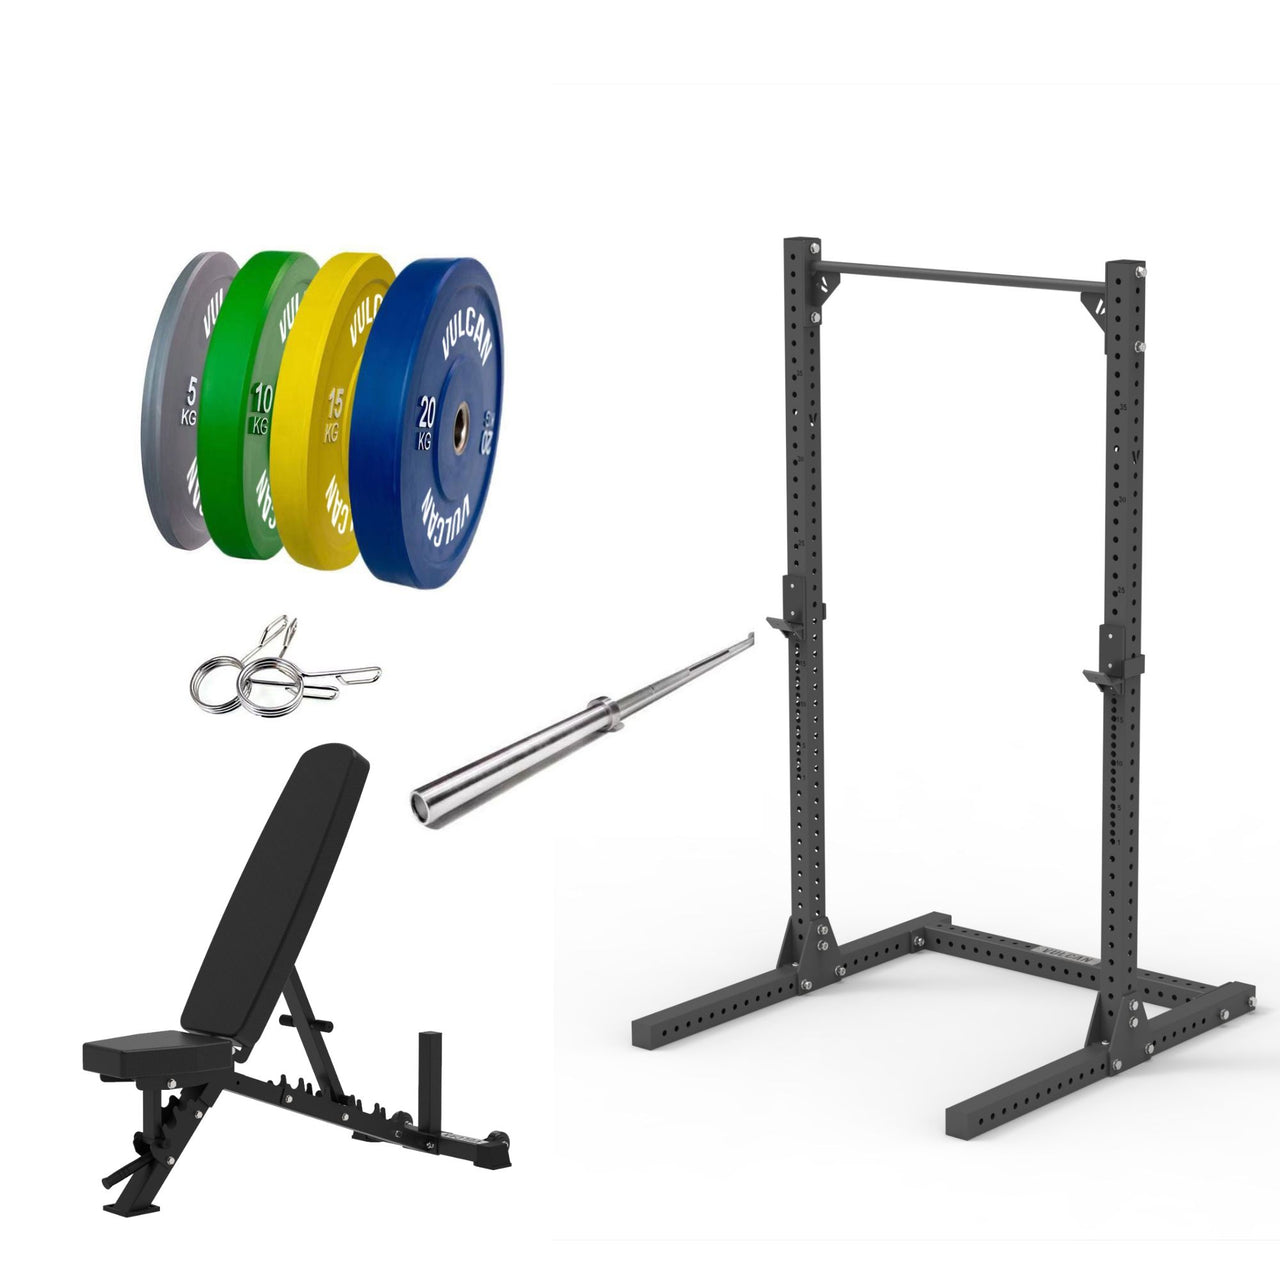 VULCAN Elite Squat Rack, Olympic Barbell, 100kg Colour Bumper Weight Plates & Pro Adjustable Bench | PRE-ORDER MID-LATE FEBRUARY